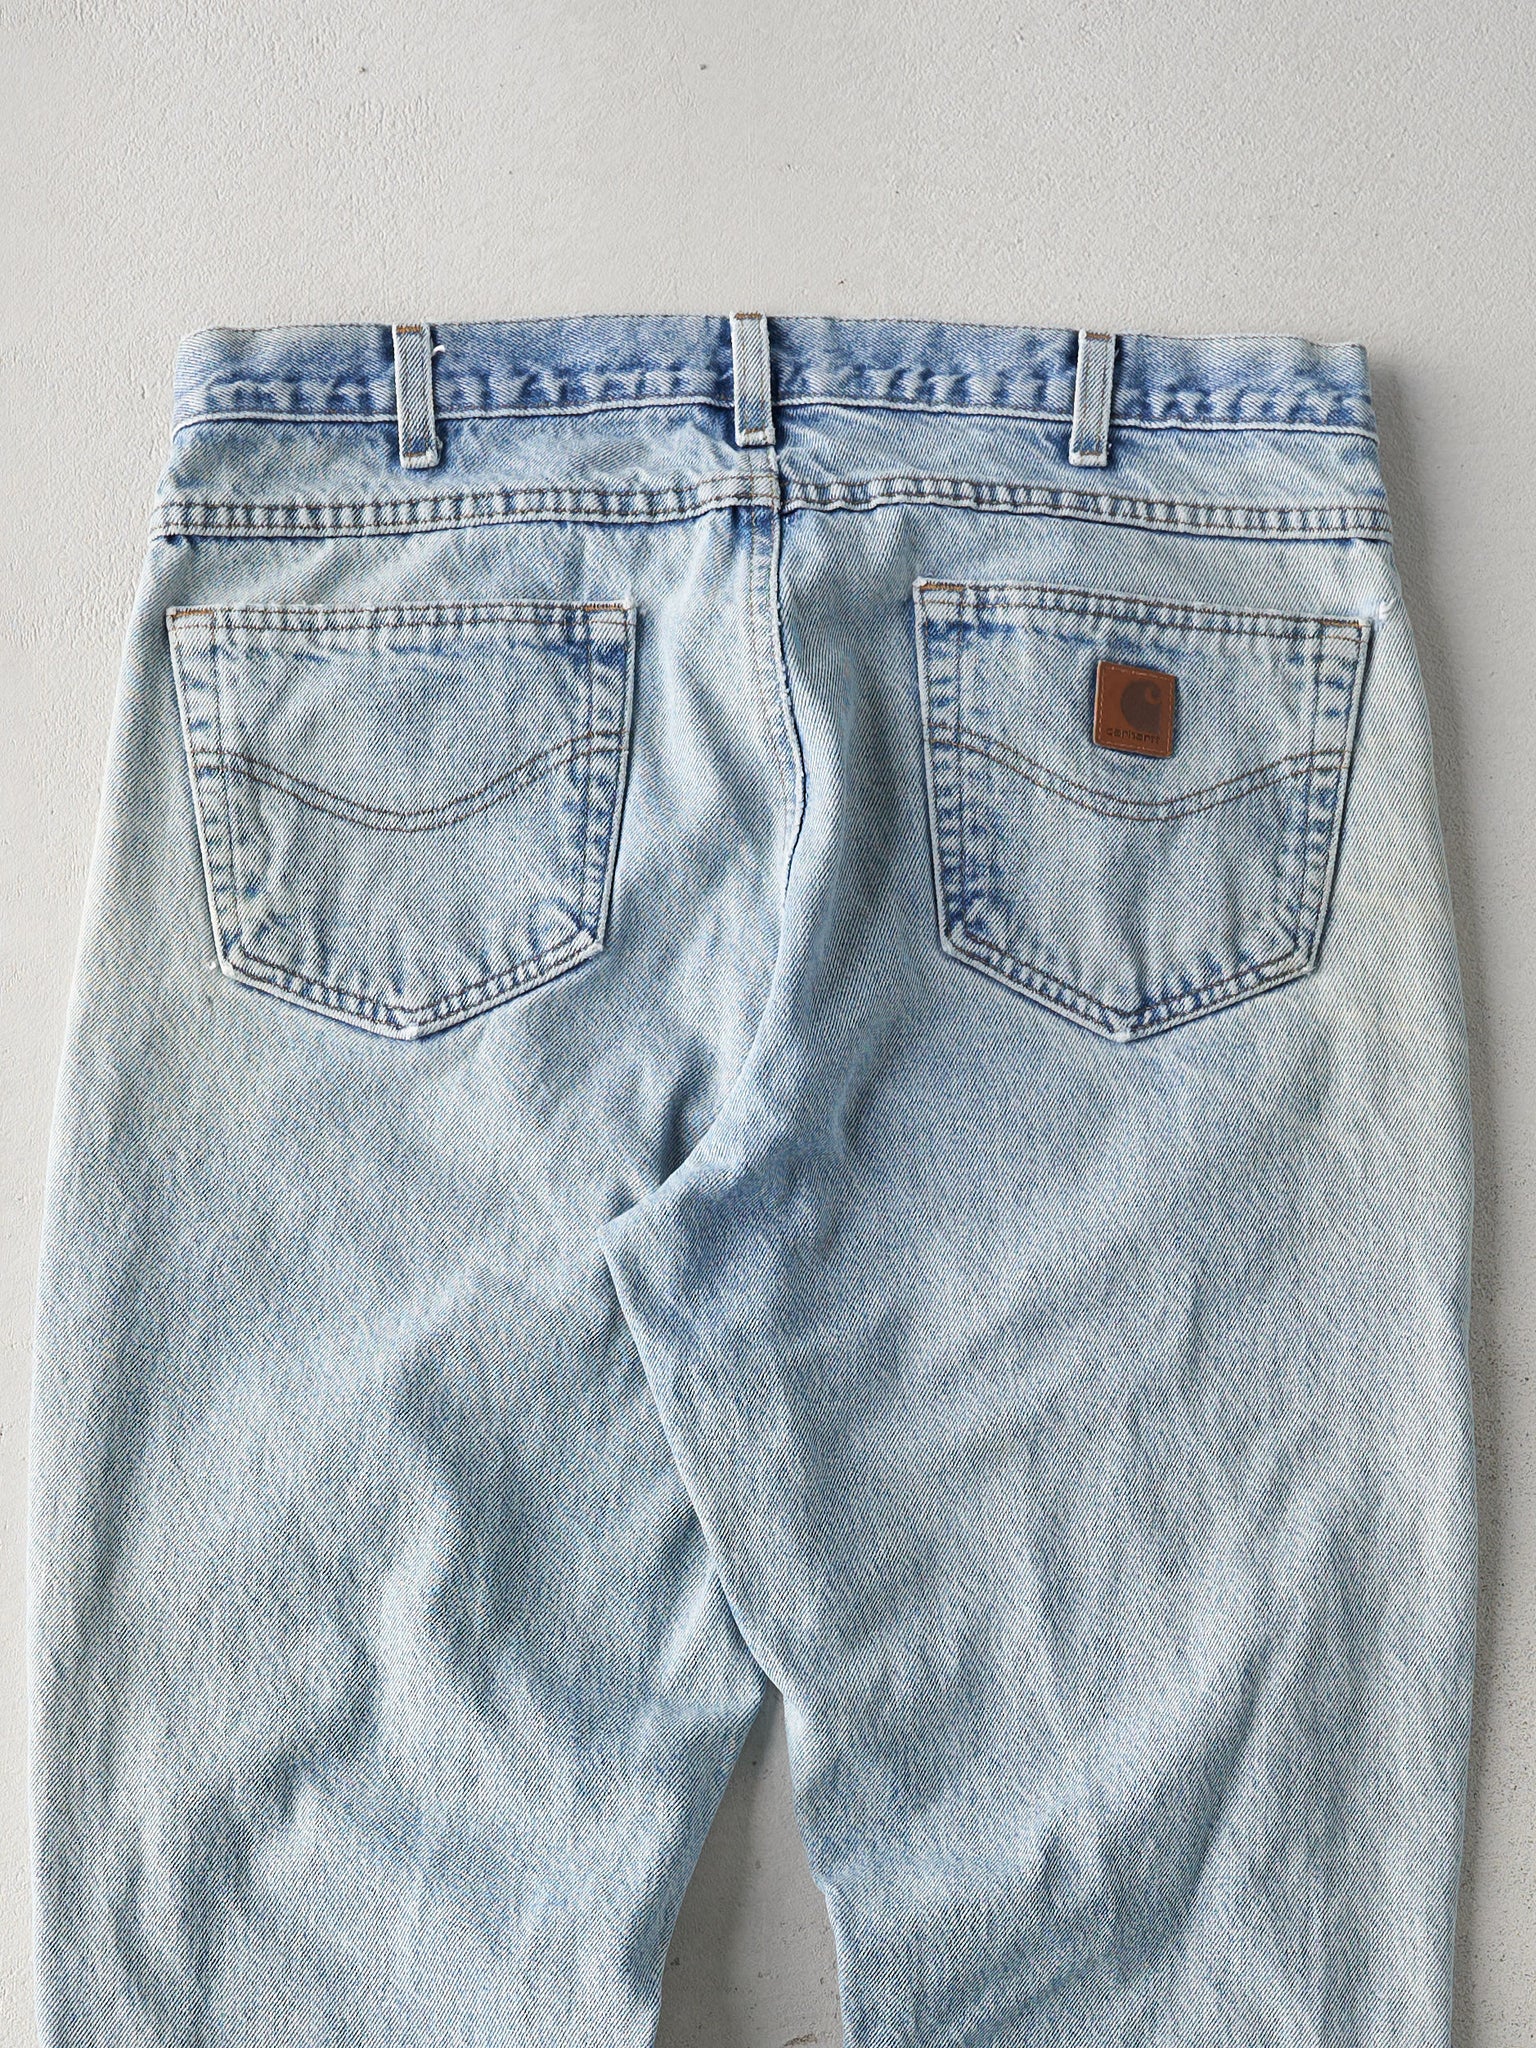 Vintage 90s Light Light Wash Carhartt Traditional Fit Jeans (36x31)